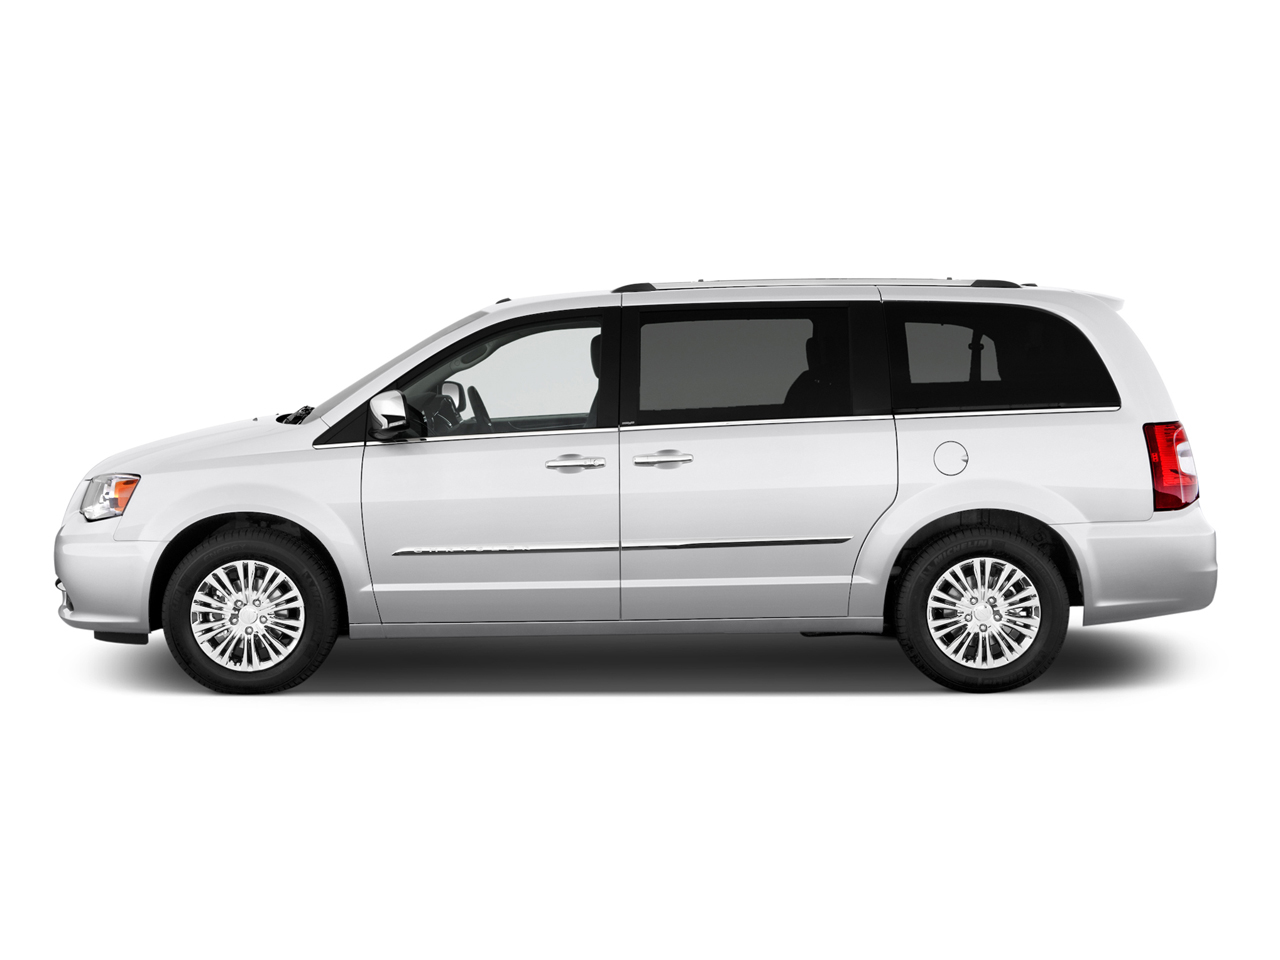 2011 chrysler town and country van